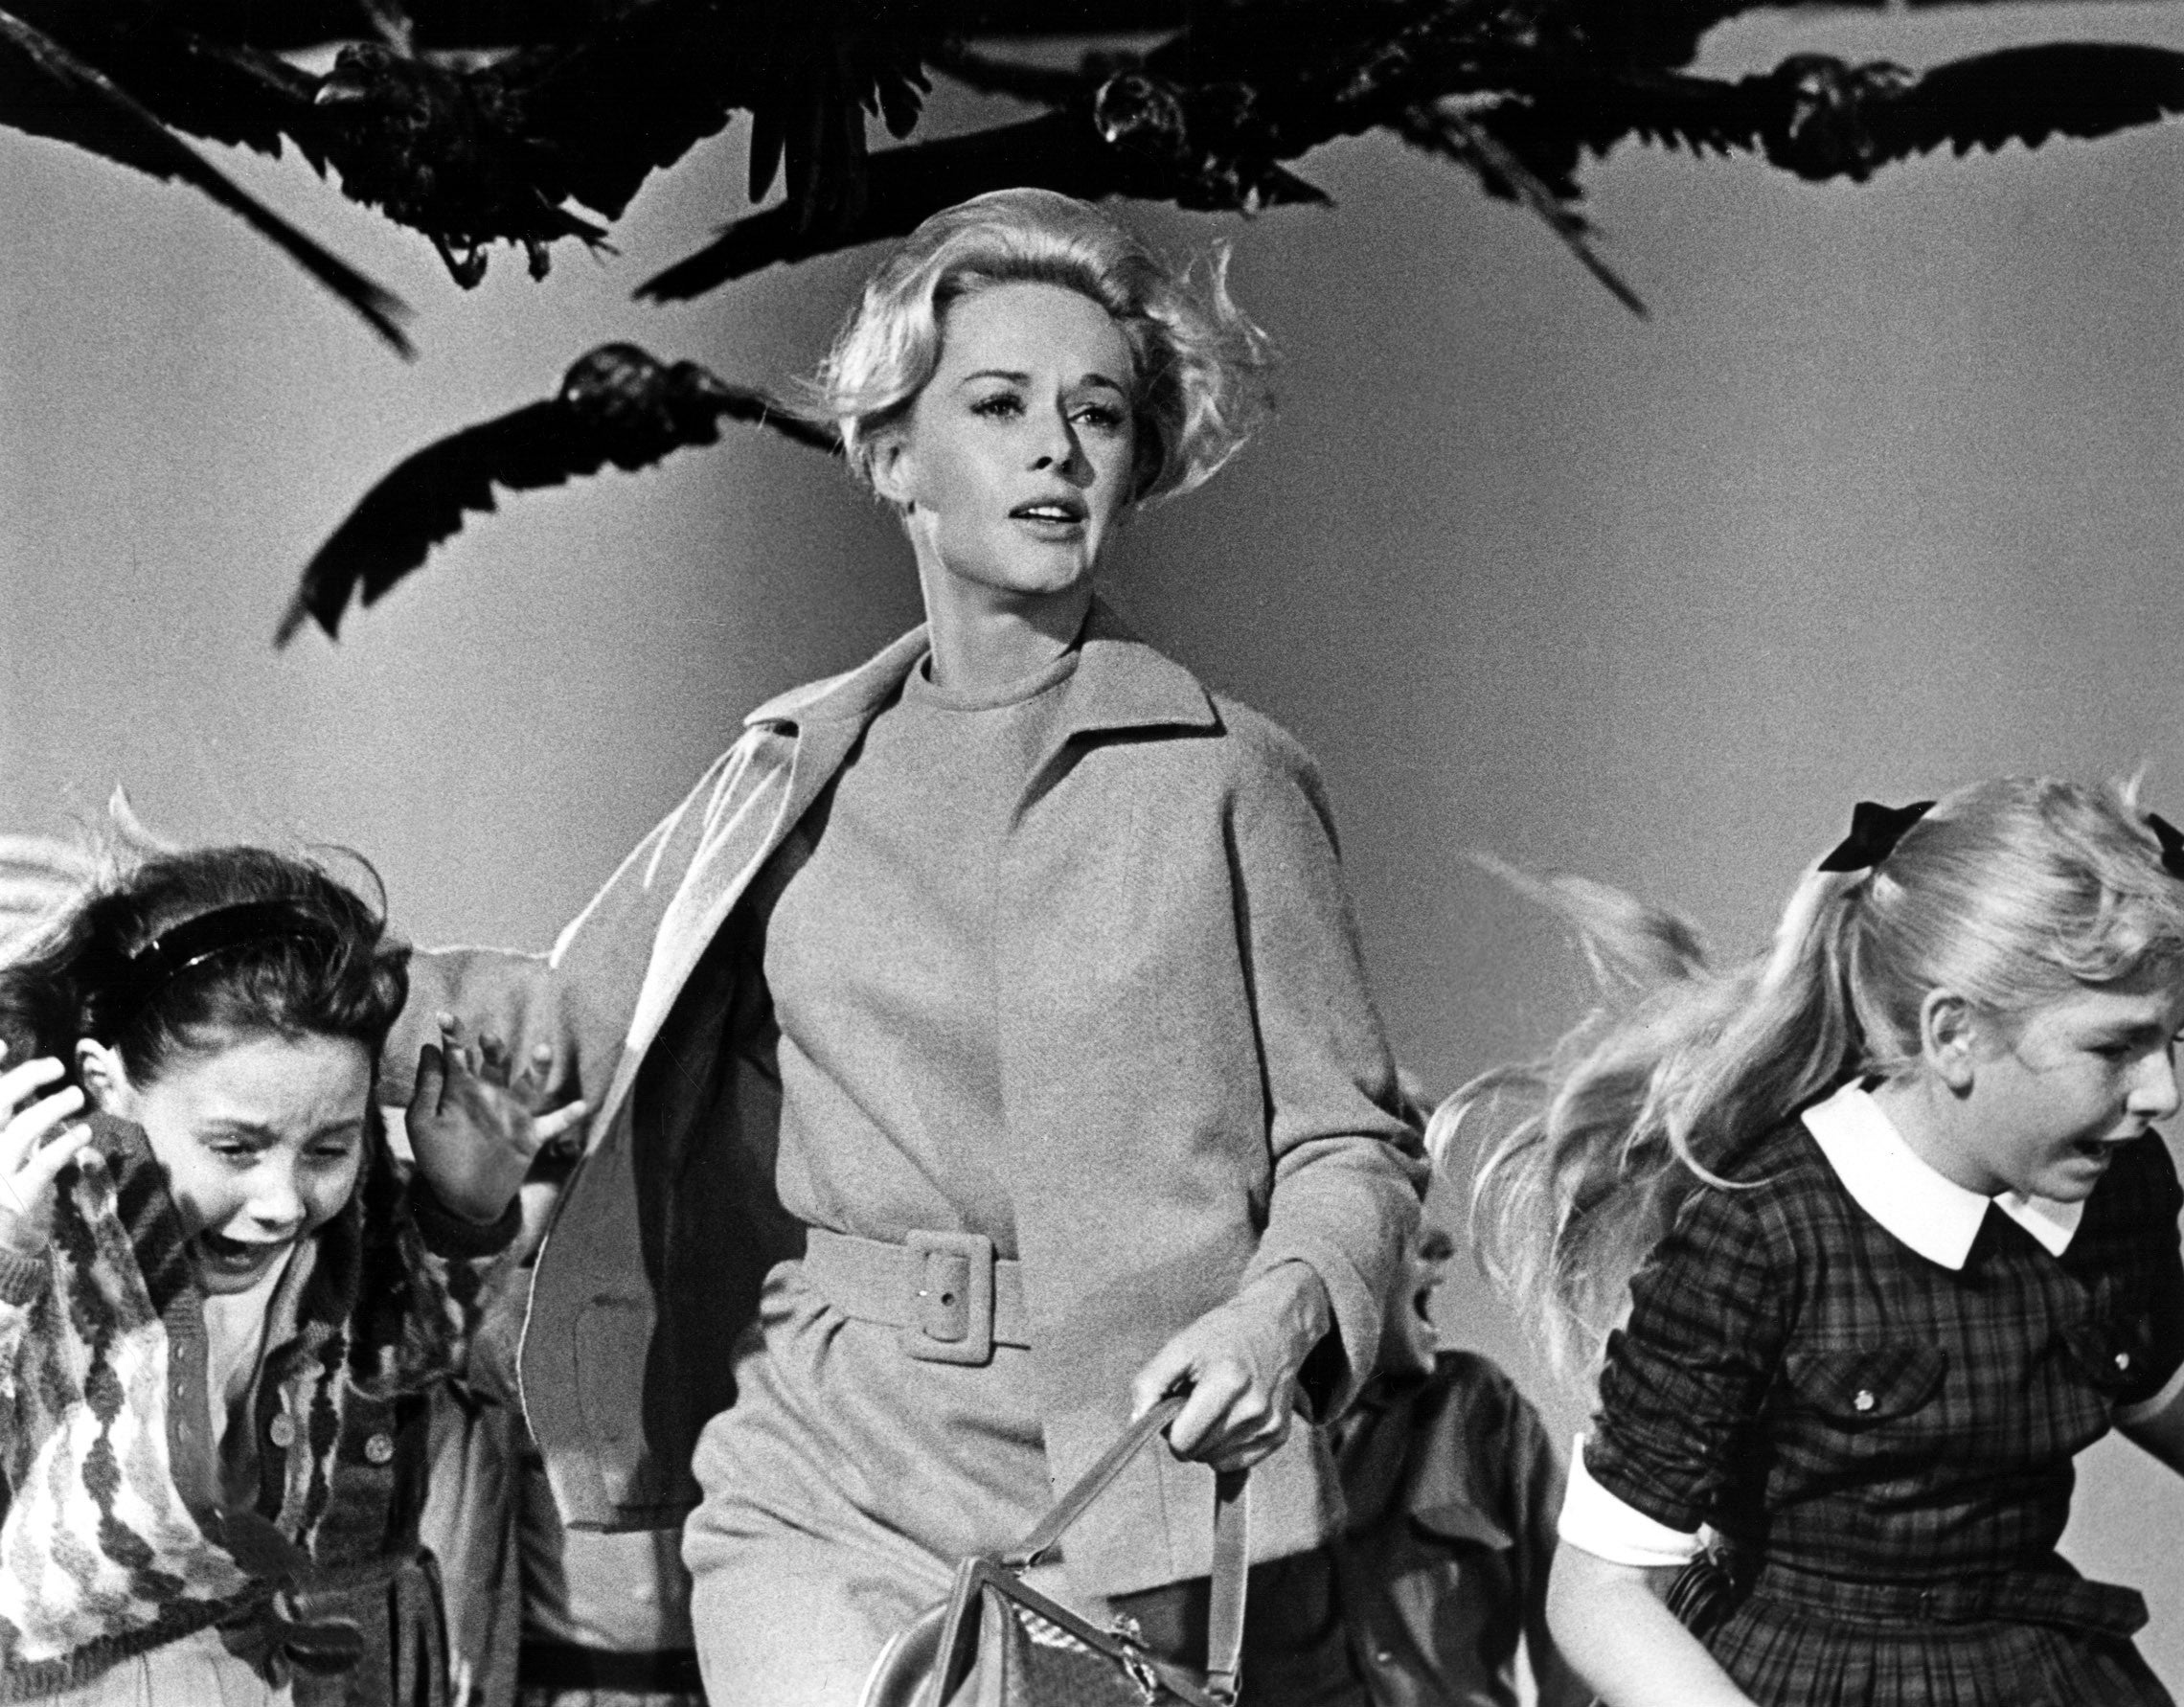 Naomi Watts is rumoured to be taking Tippi Hedren's role in The Birds